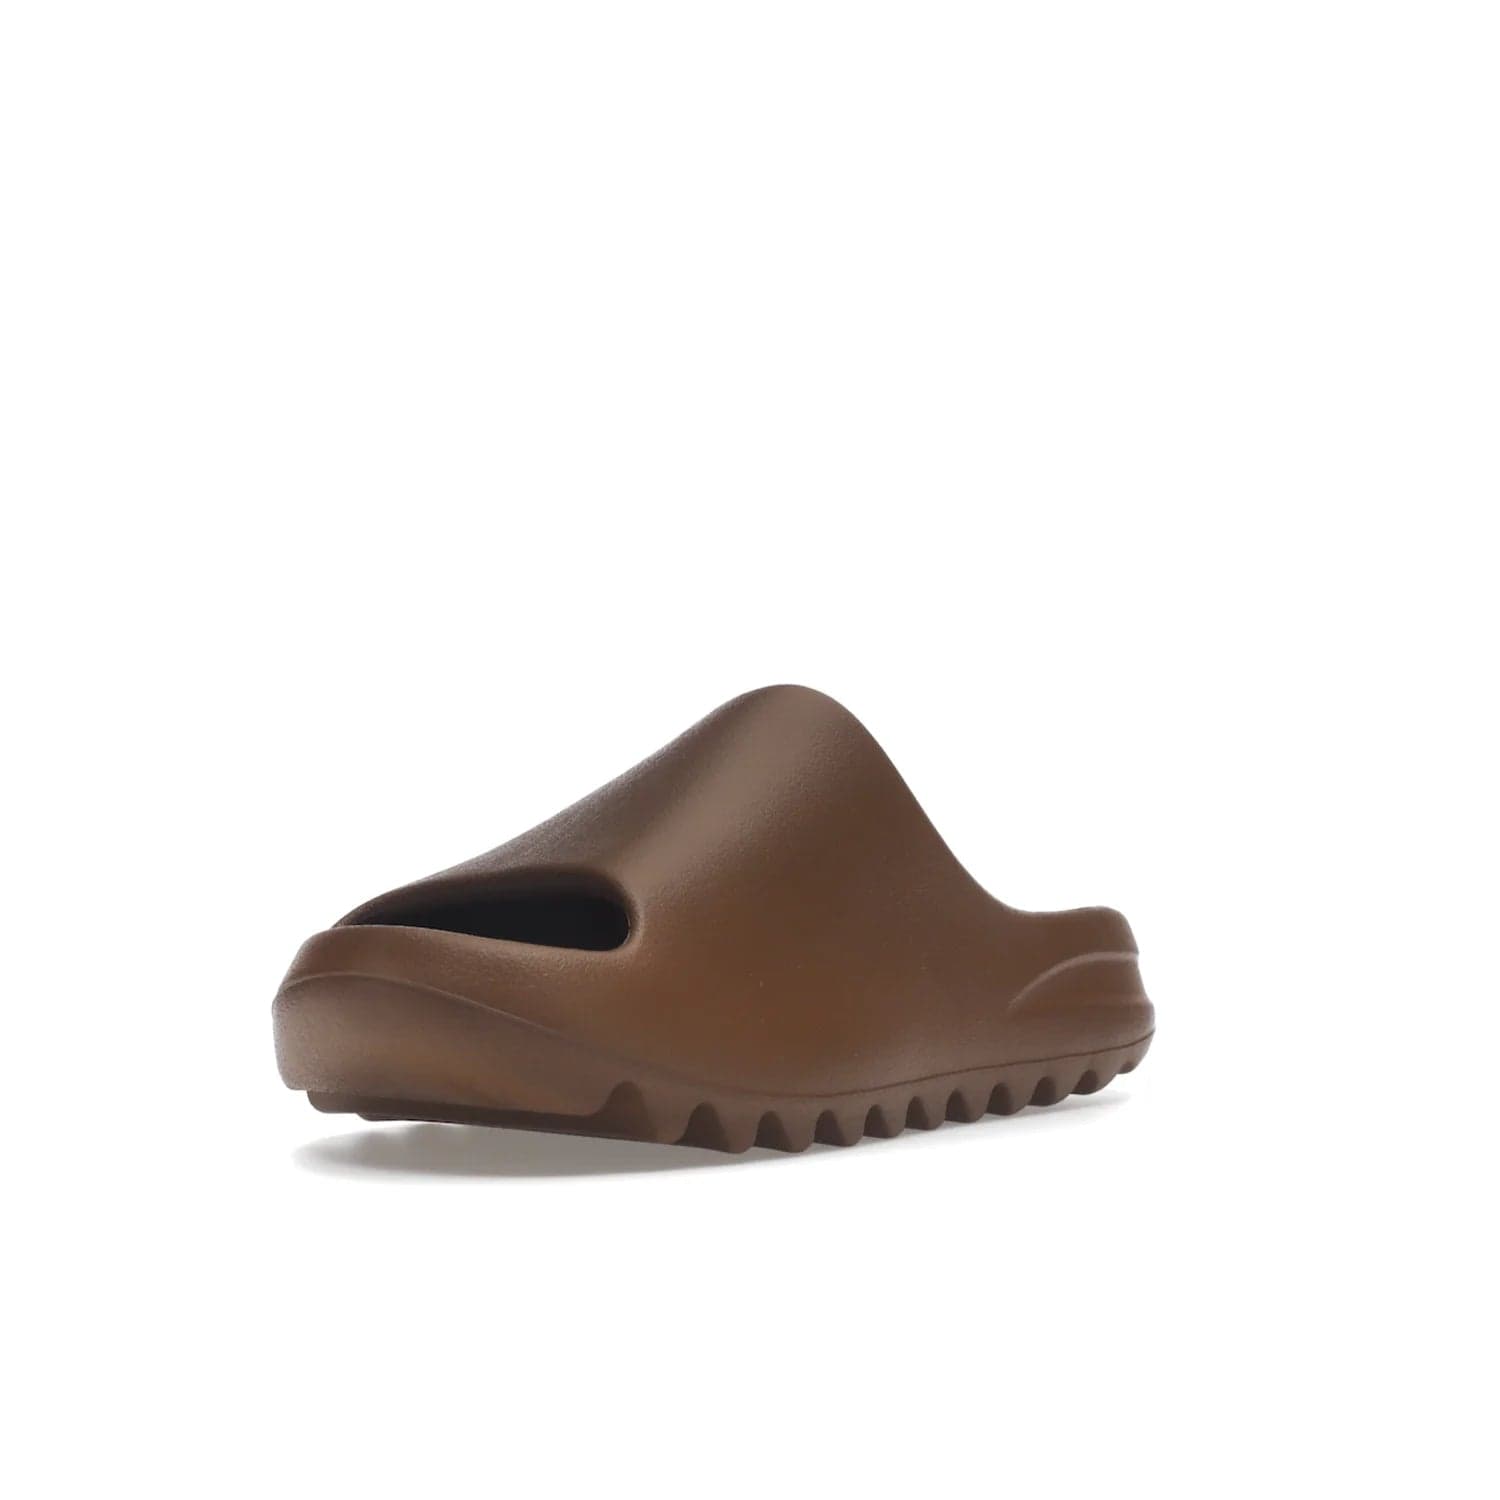 adidas Yeezy Slide Flax - Image 14 - Only at www.BallersClubKickz.com - Score the perfect casual look with the adidas Yeezy Slide Flax. Made with lightweight injected EVA plus horizontal grooves underfoot for traction. Release on August 22, 2022. $70.